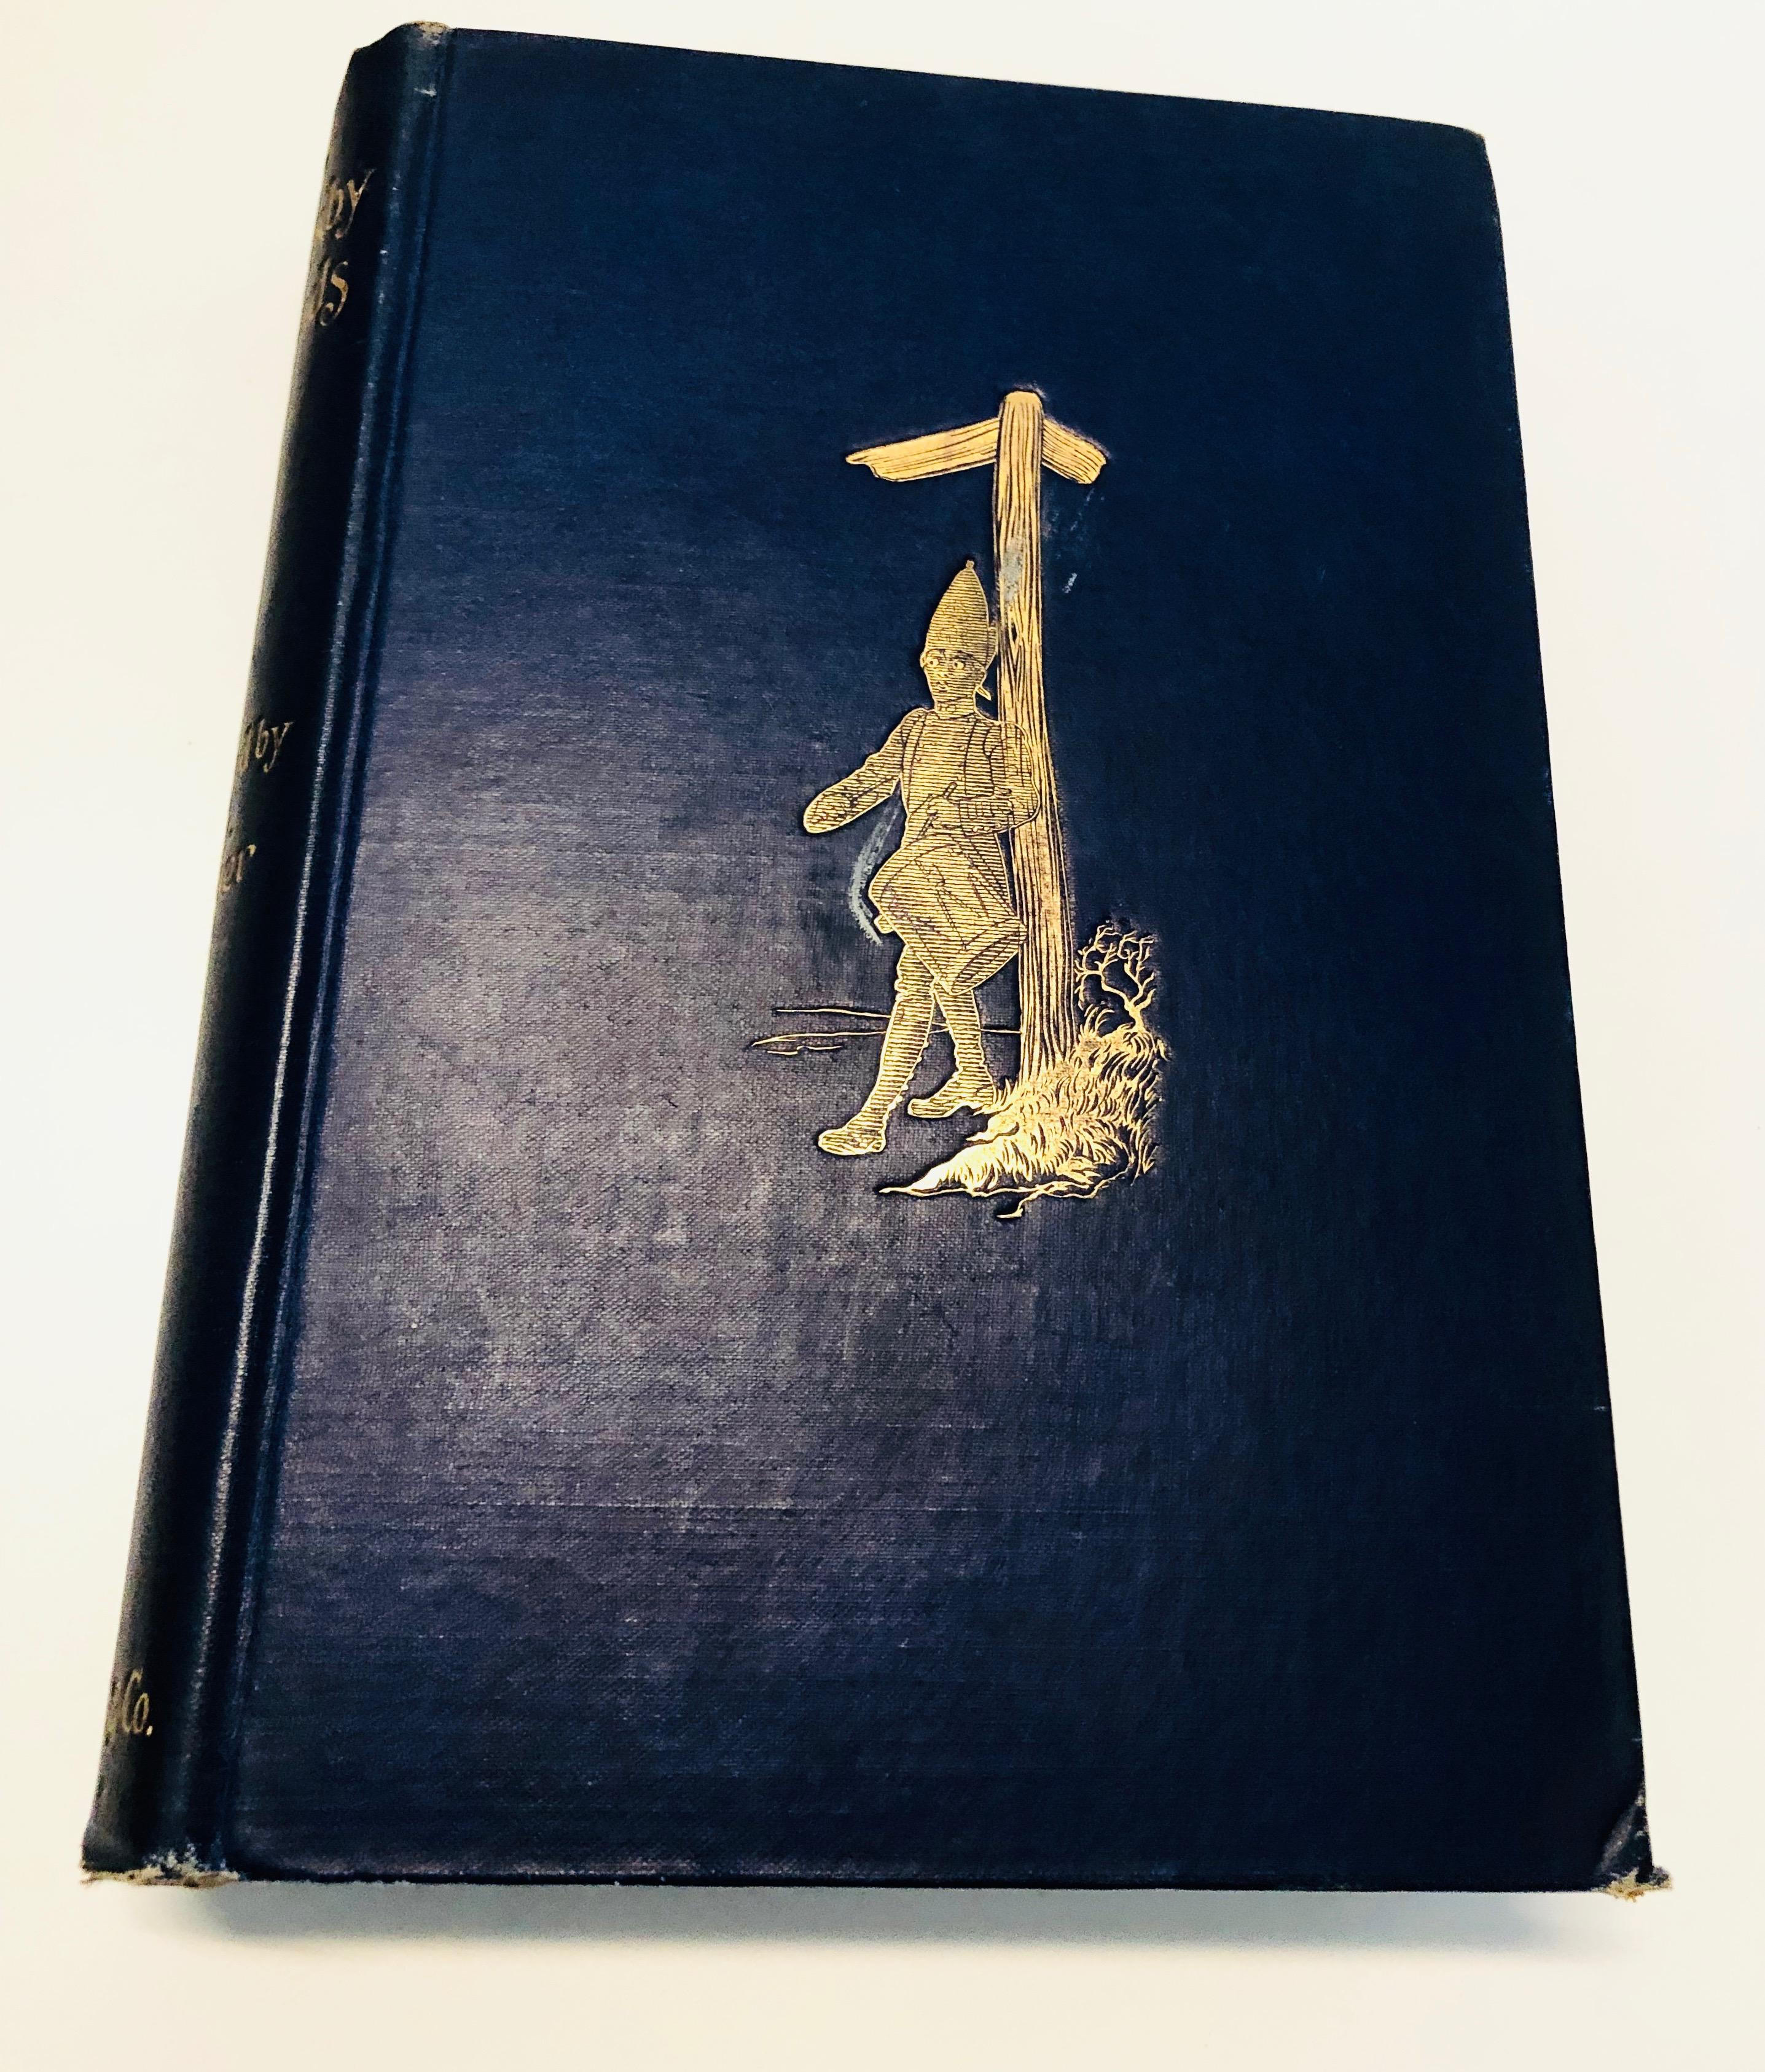 RARE The Ingoldsby Legends of Mirth and Marvels (1911) Illustrated by H.G. Theaker